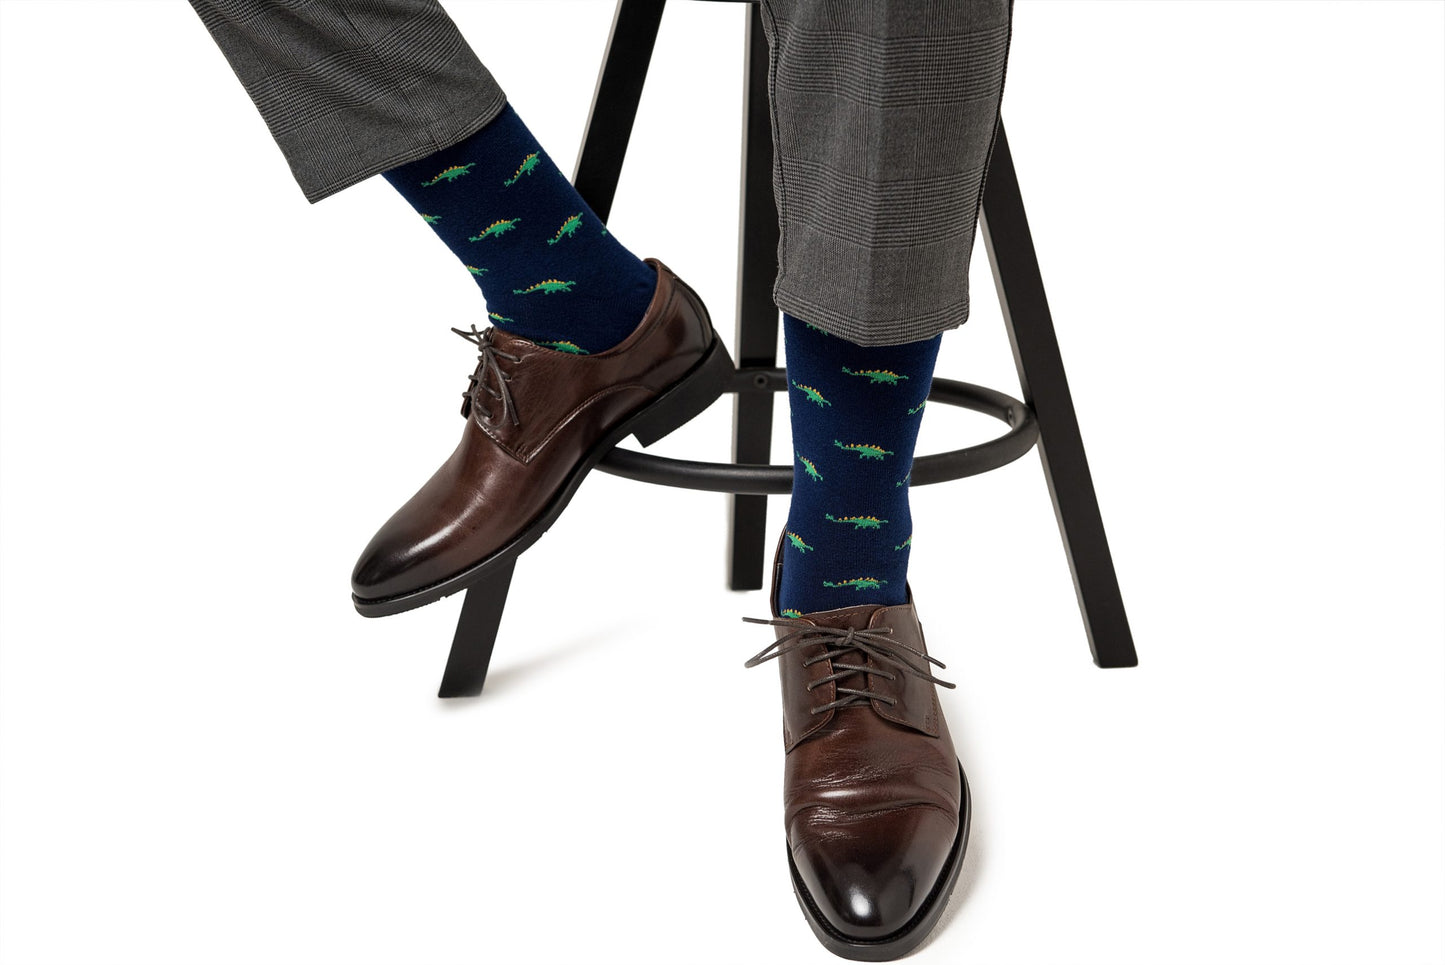 Person wearing grey trousers, Stegosaurus socks, and brown leather shoes sitting on a black stool.